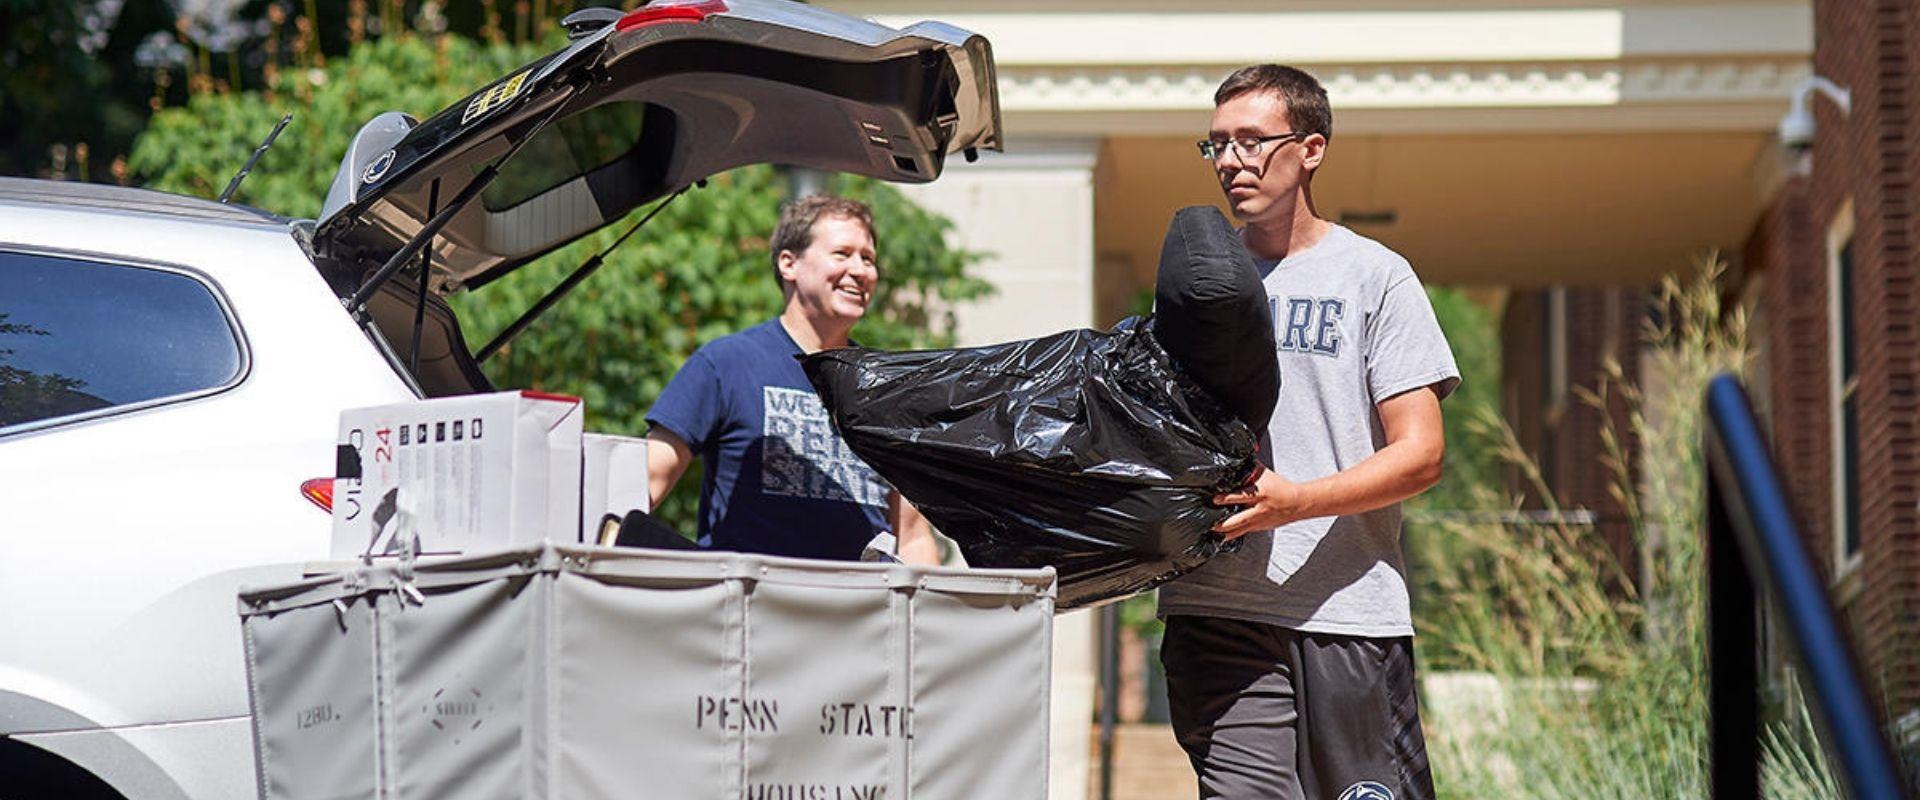 student unloading bags from car during move-in